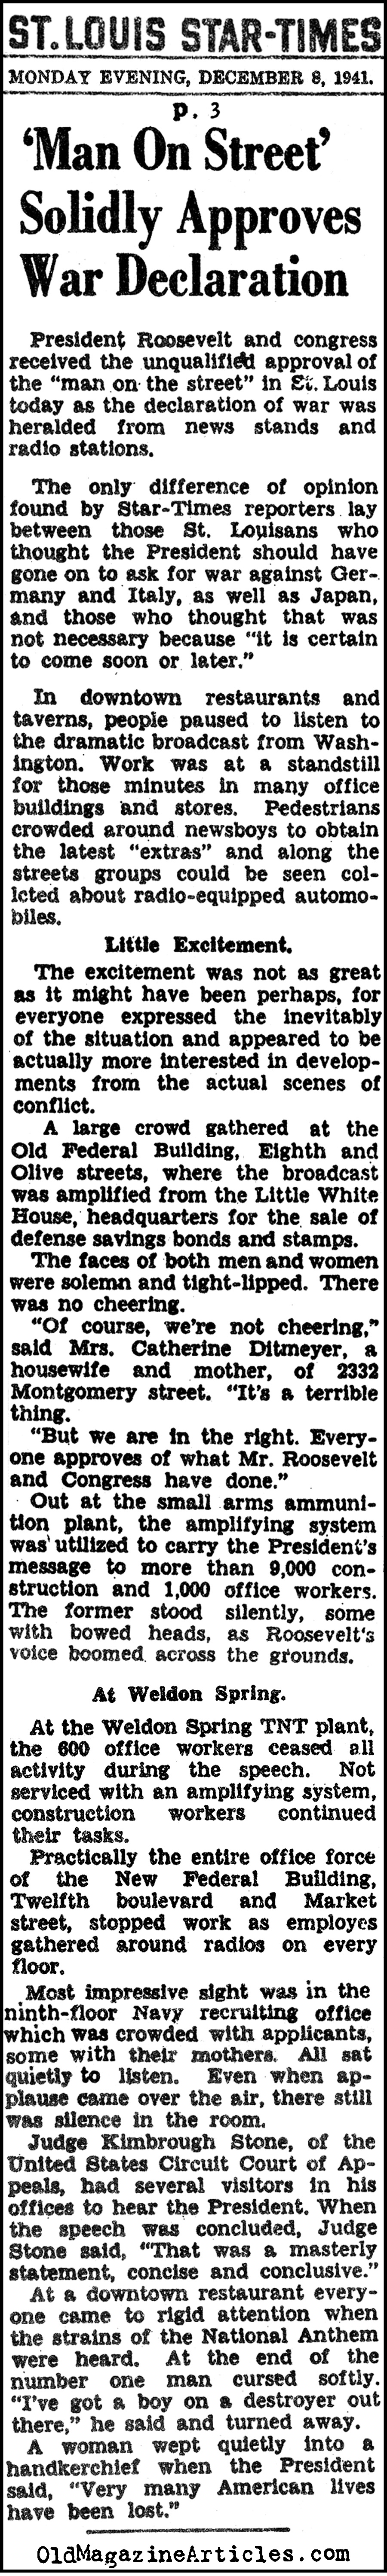 ''Man on the Street Solidly Approves of War Declaration'' (St. Louis Star-Times, 1941)